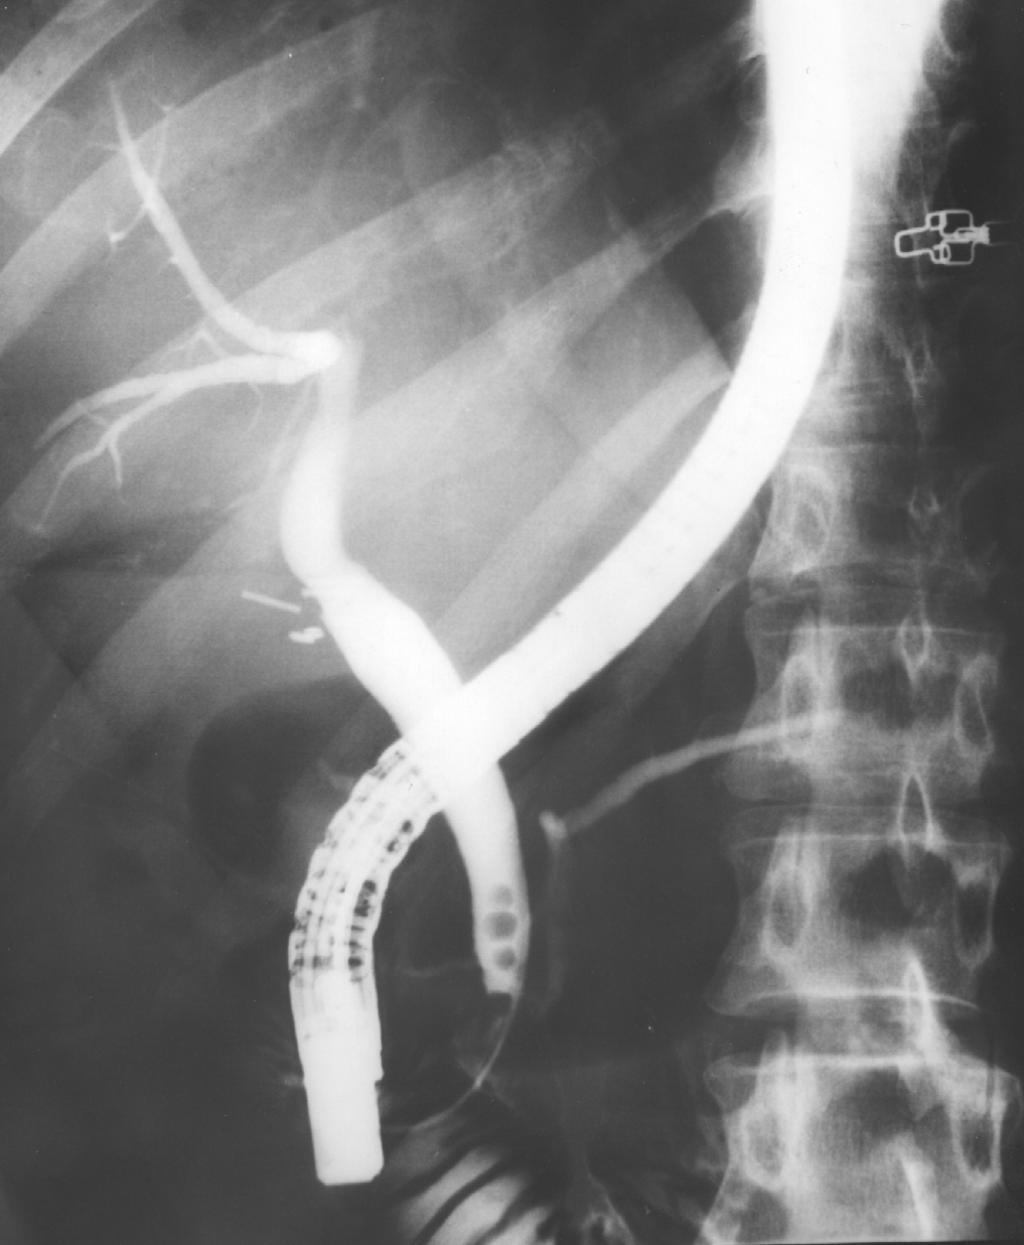 Endoscopic scissors were passed through the epigastric port, and the cystic duct was incised along one-half its circumference just distal to the previously placed titanium clip.